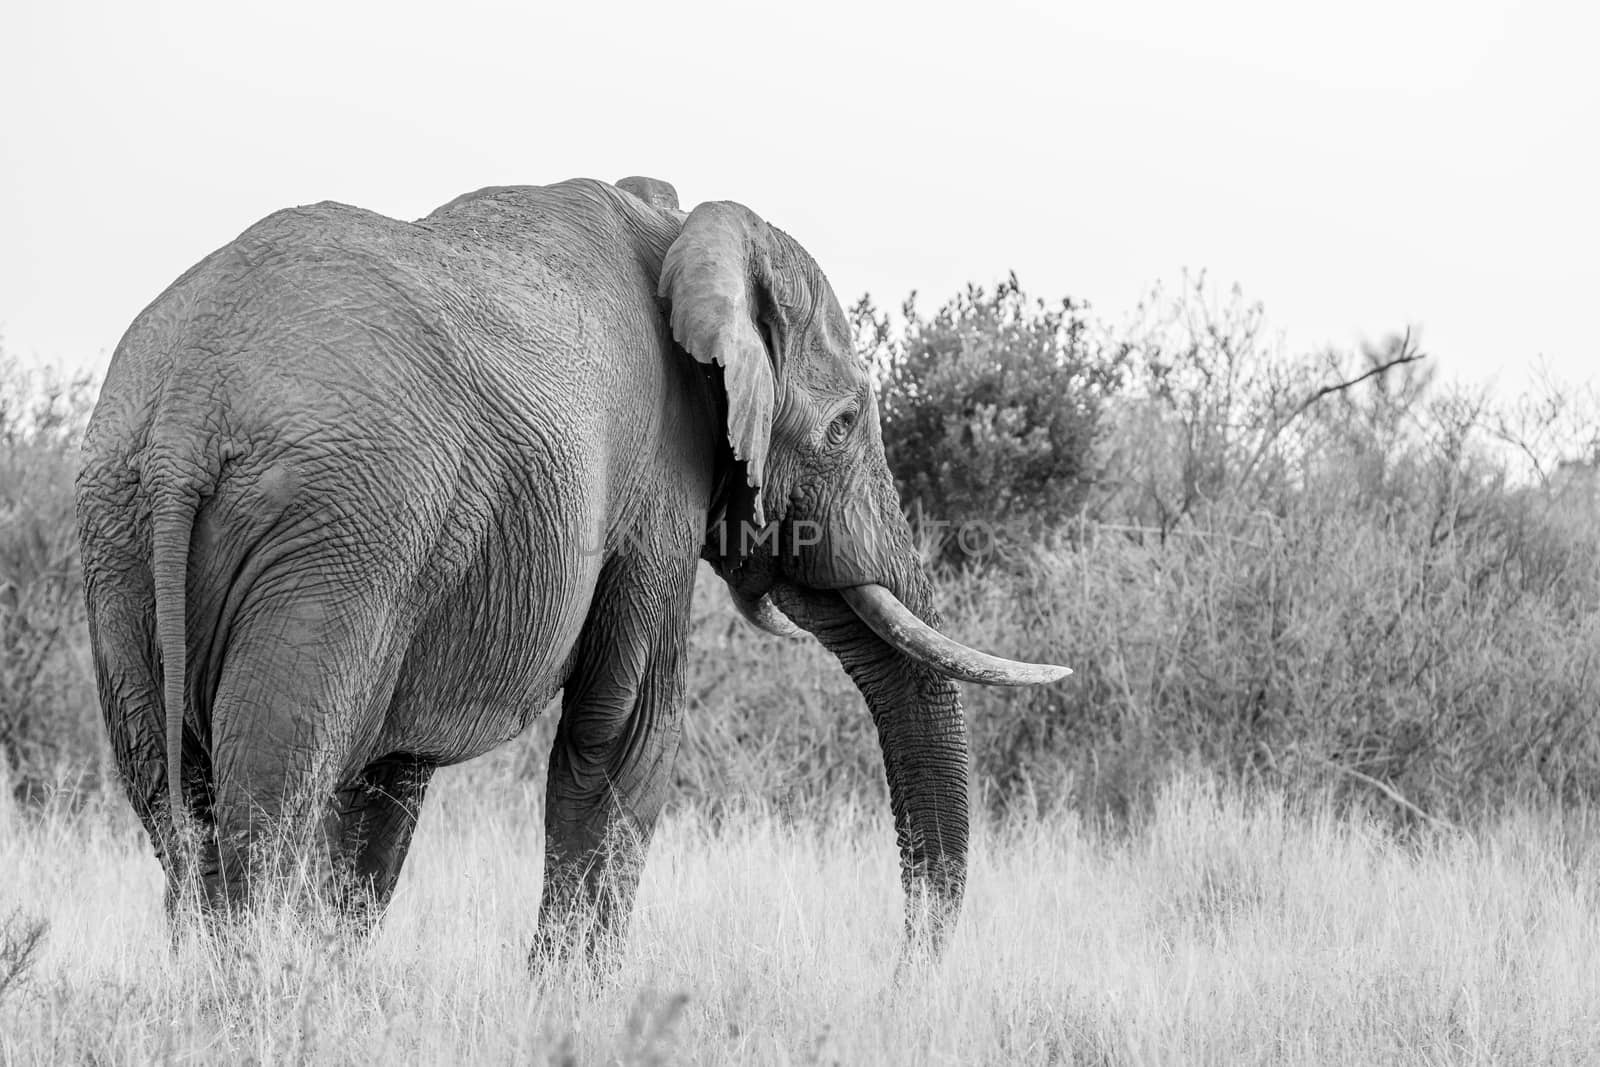 Big Elephant bull facing away from the camera in black and white the Welgevonden game reserve, South Africa.